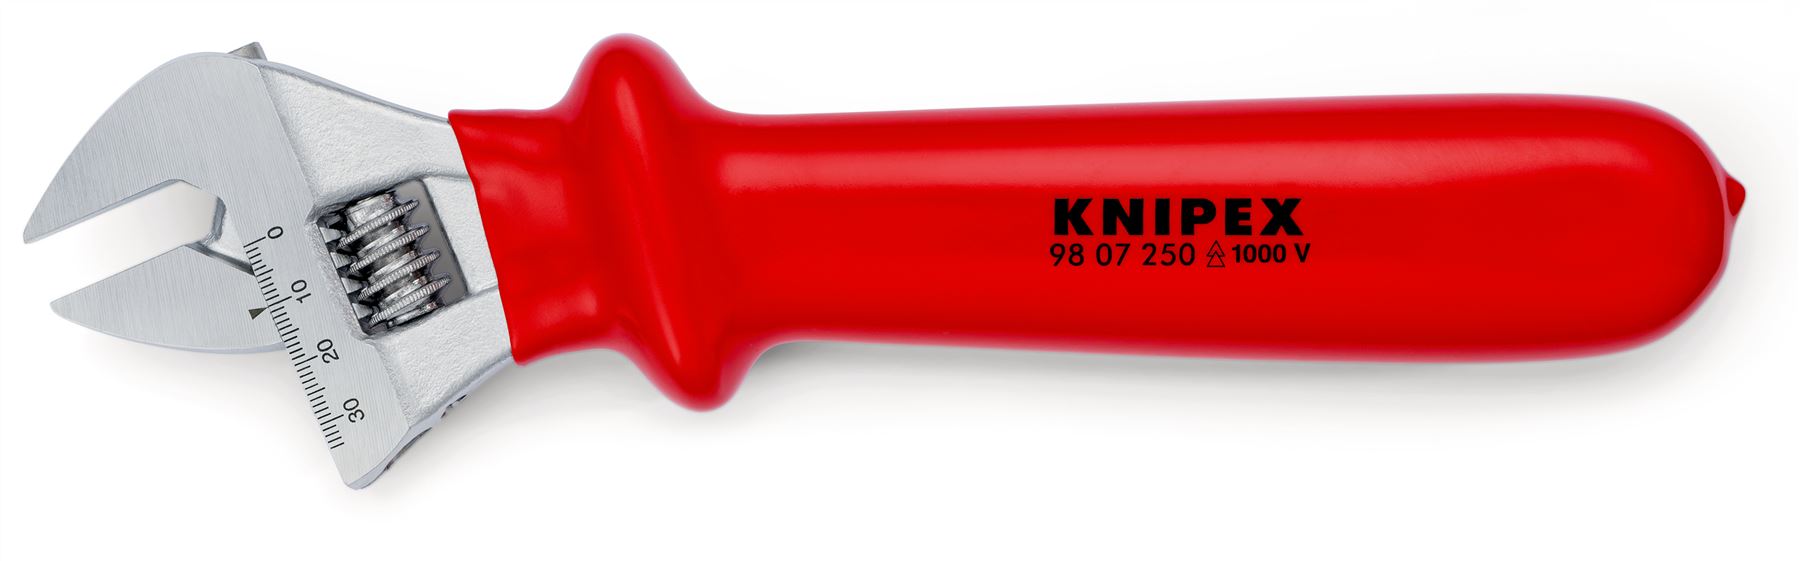 KNIPEX Adjustable Wrench 30mm Nut Capacity 260mm VDE Dipped Insulated 98 07 250